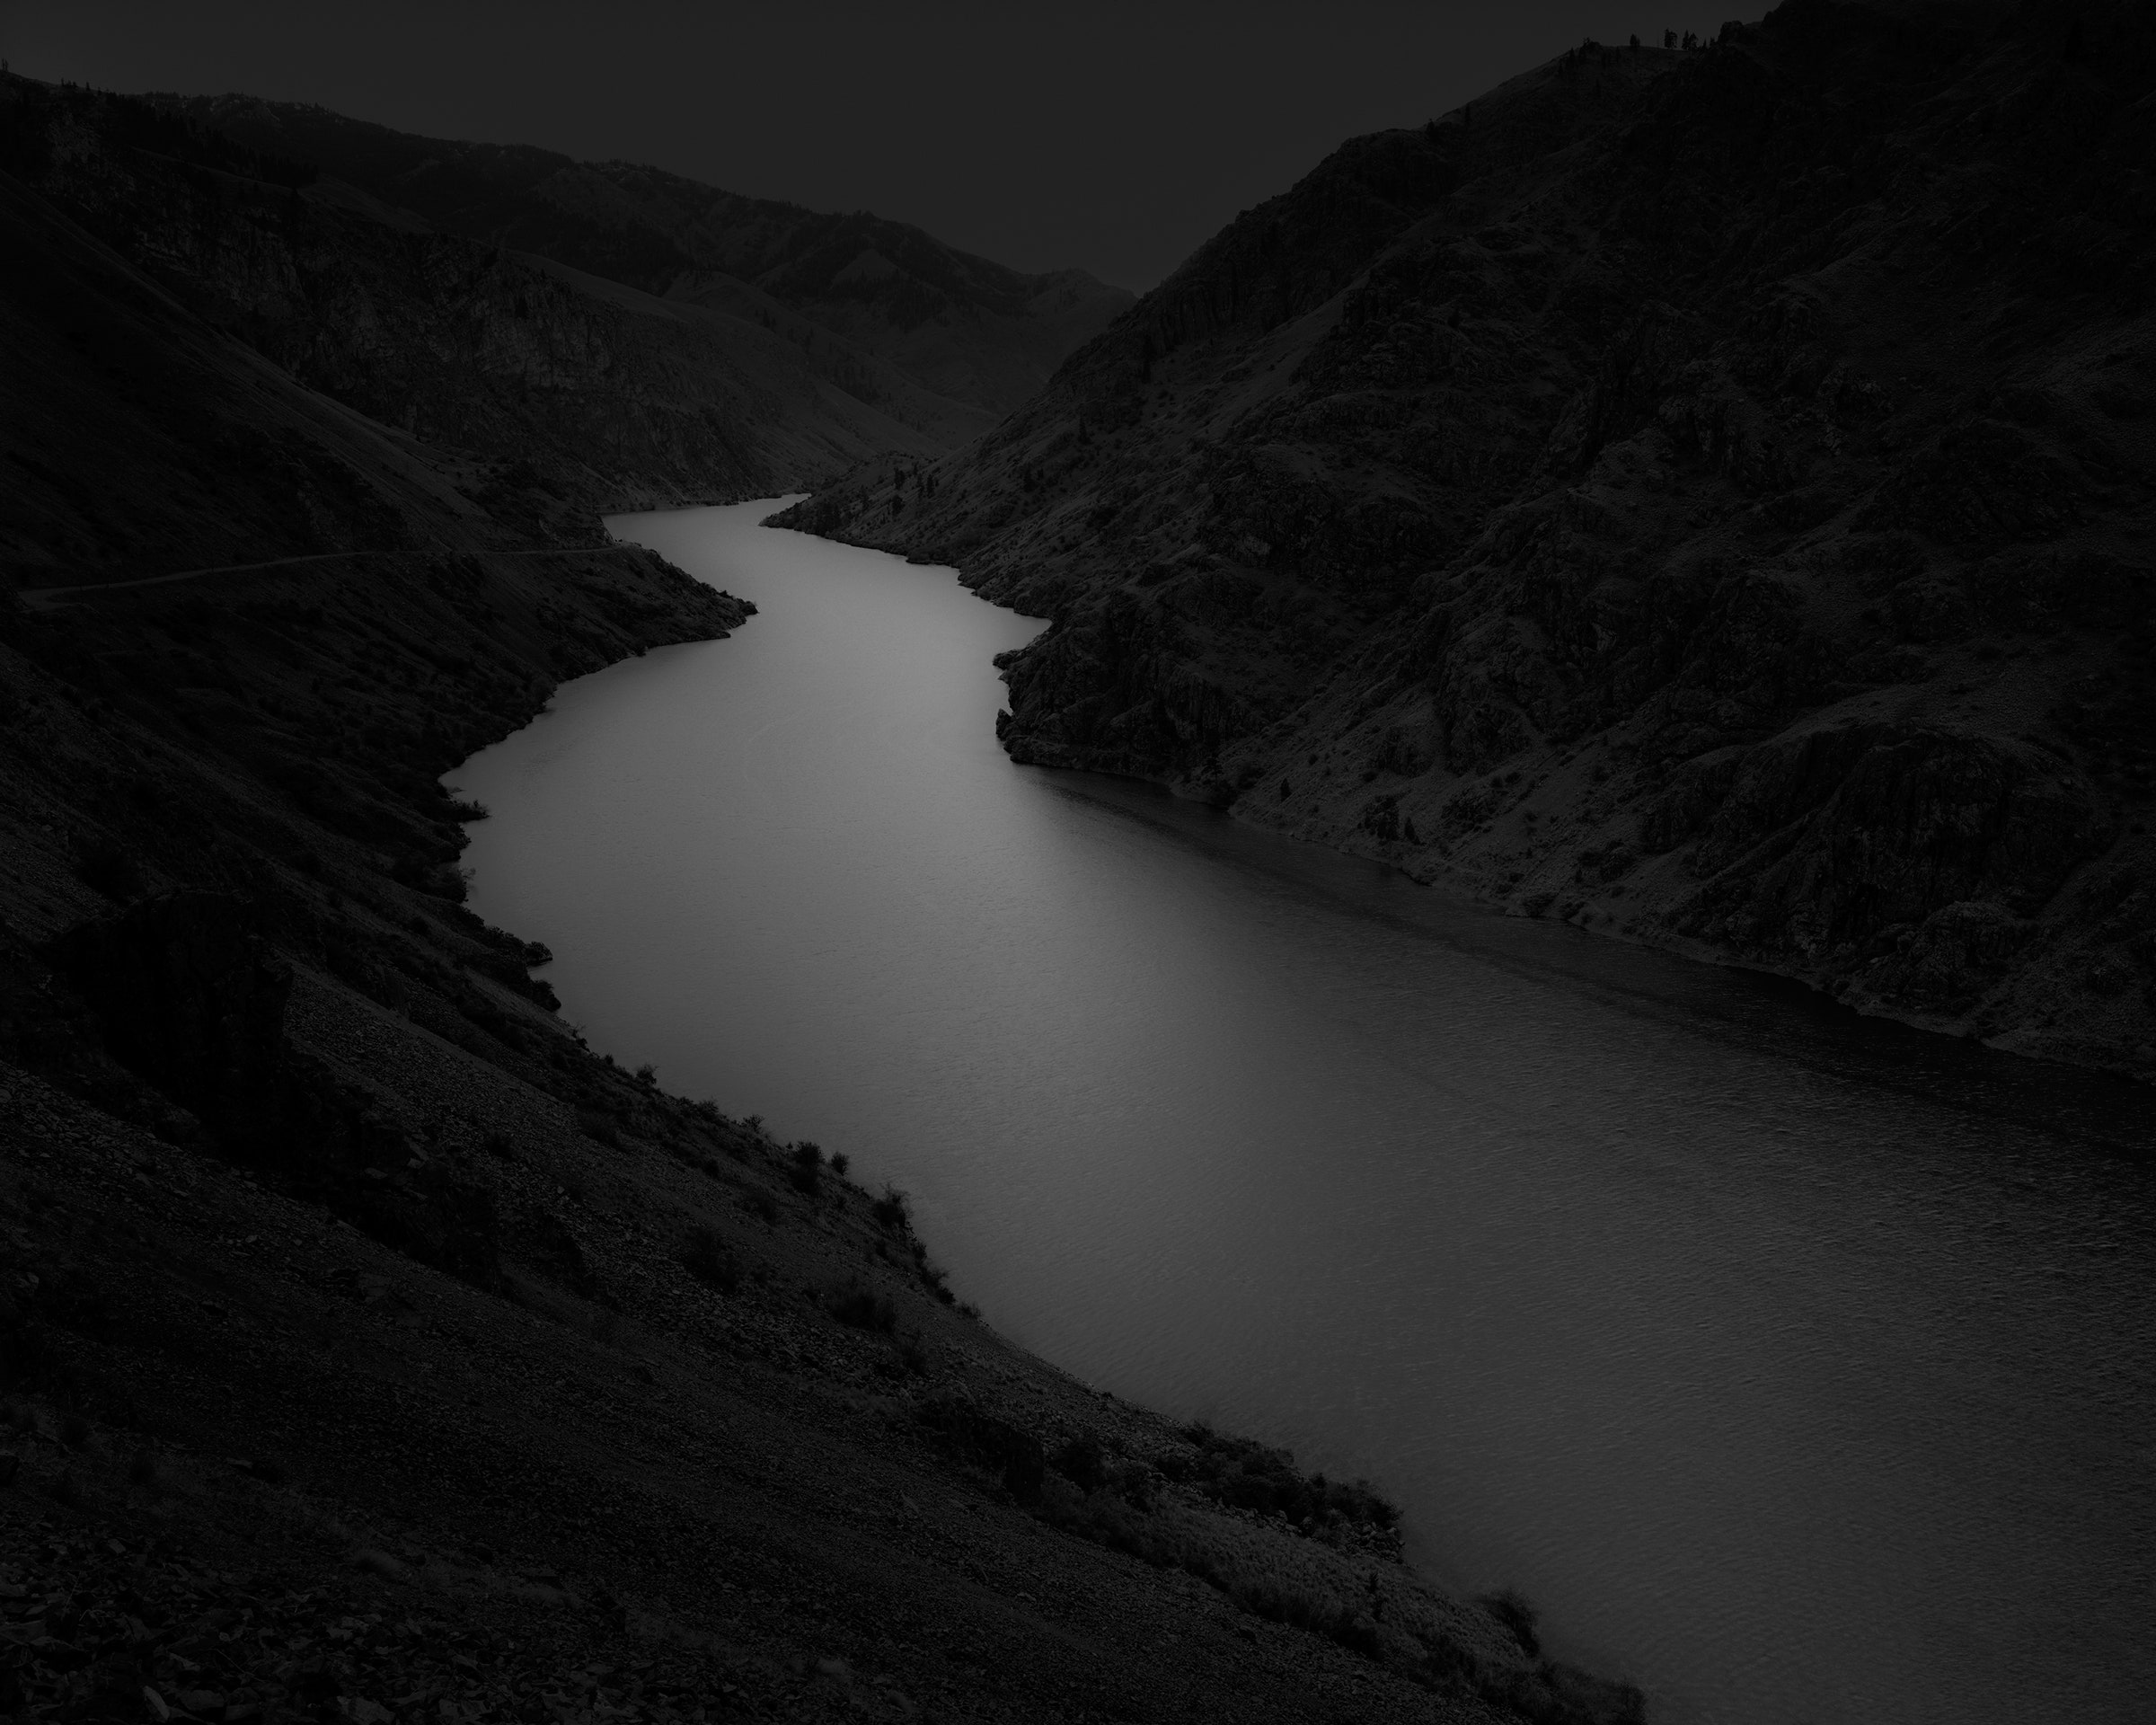 Monochrome Night Nature Photography Wallpapers